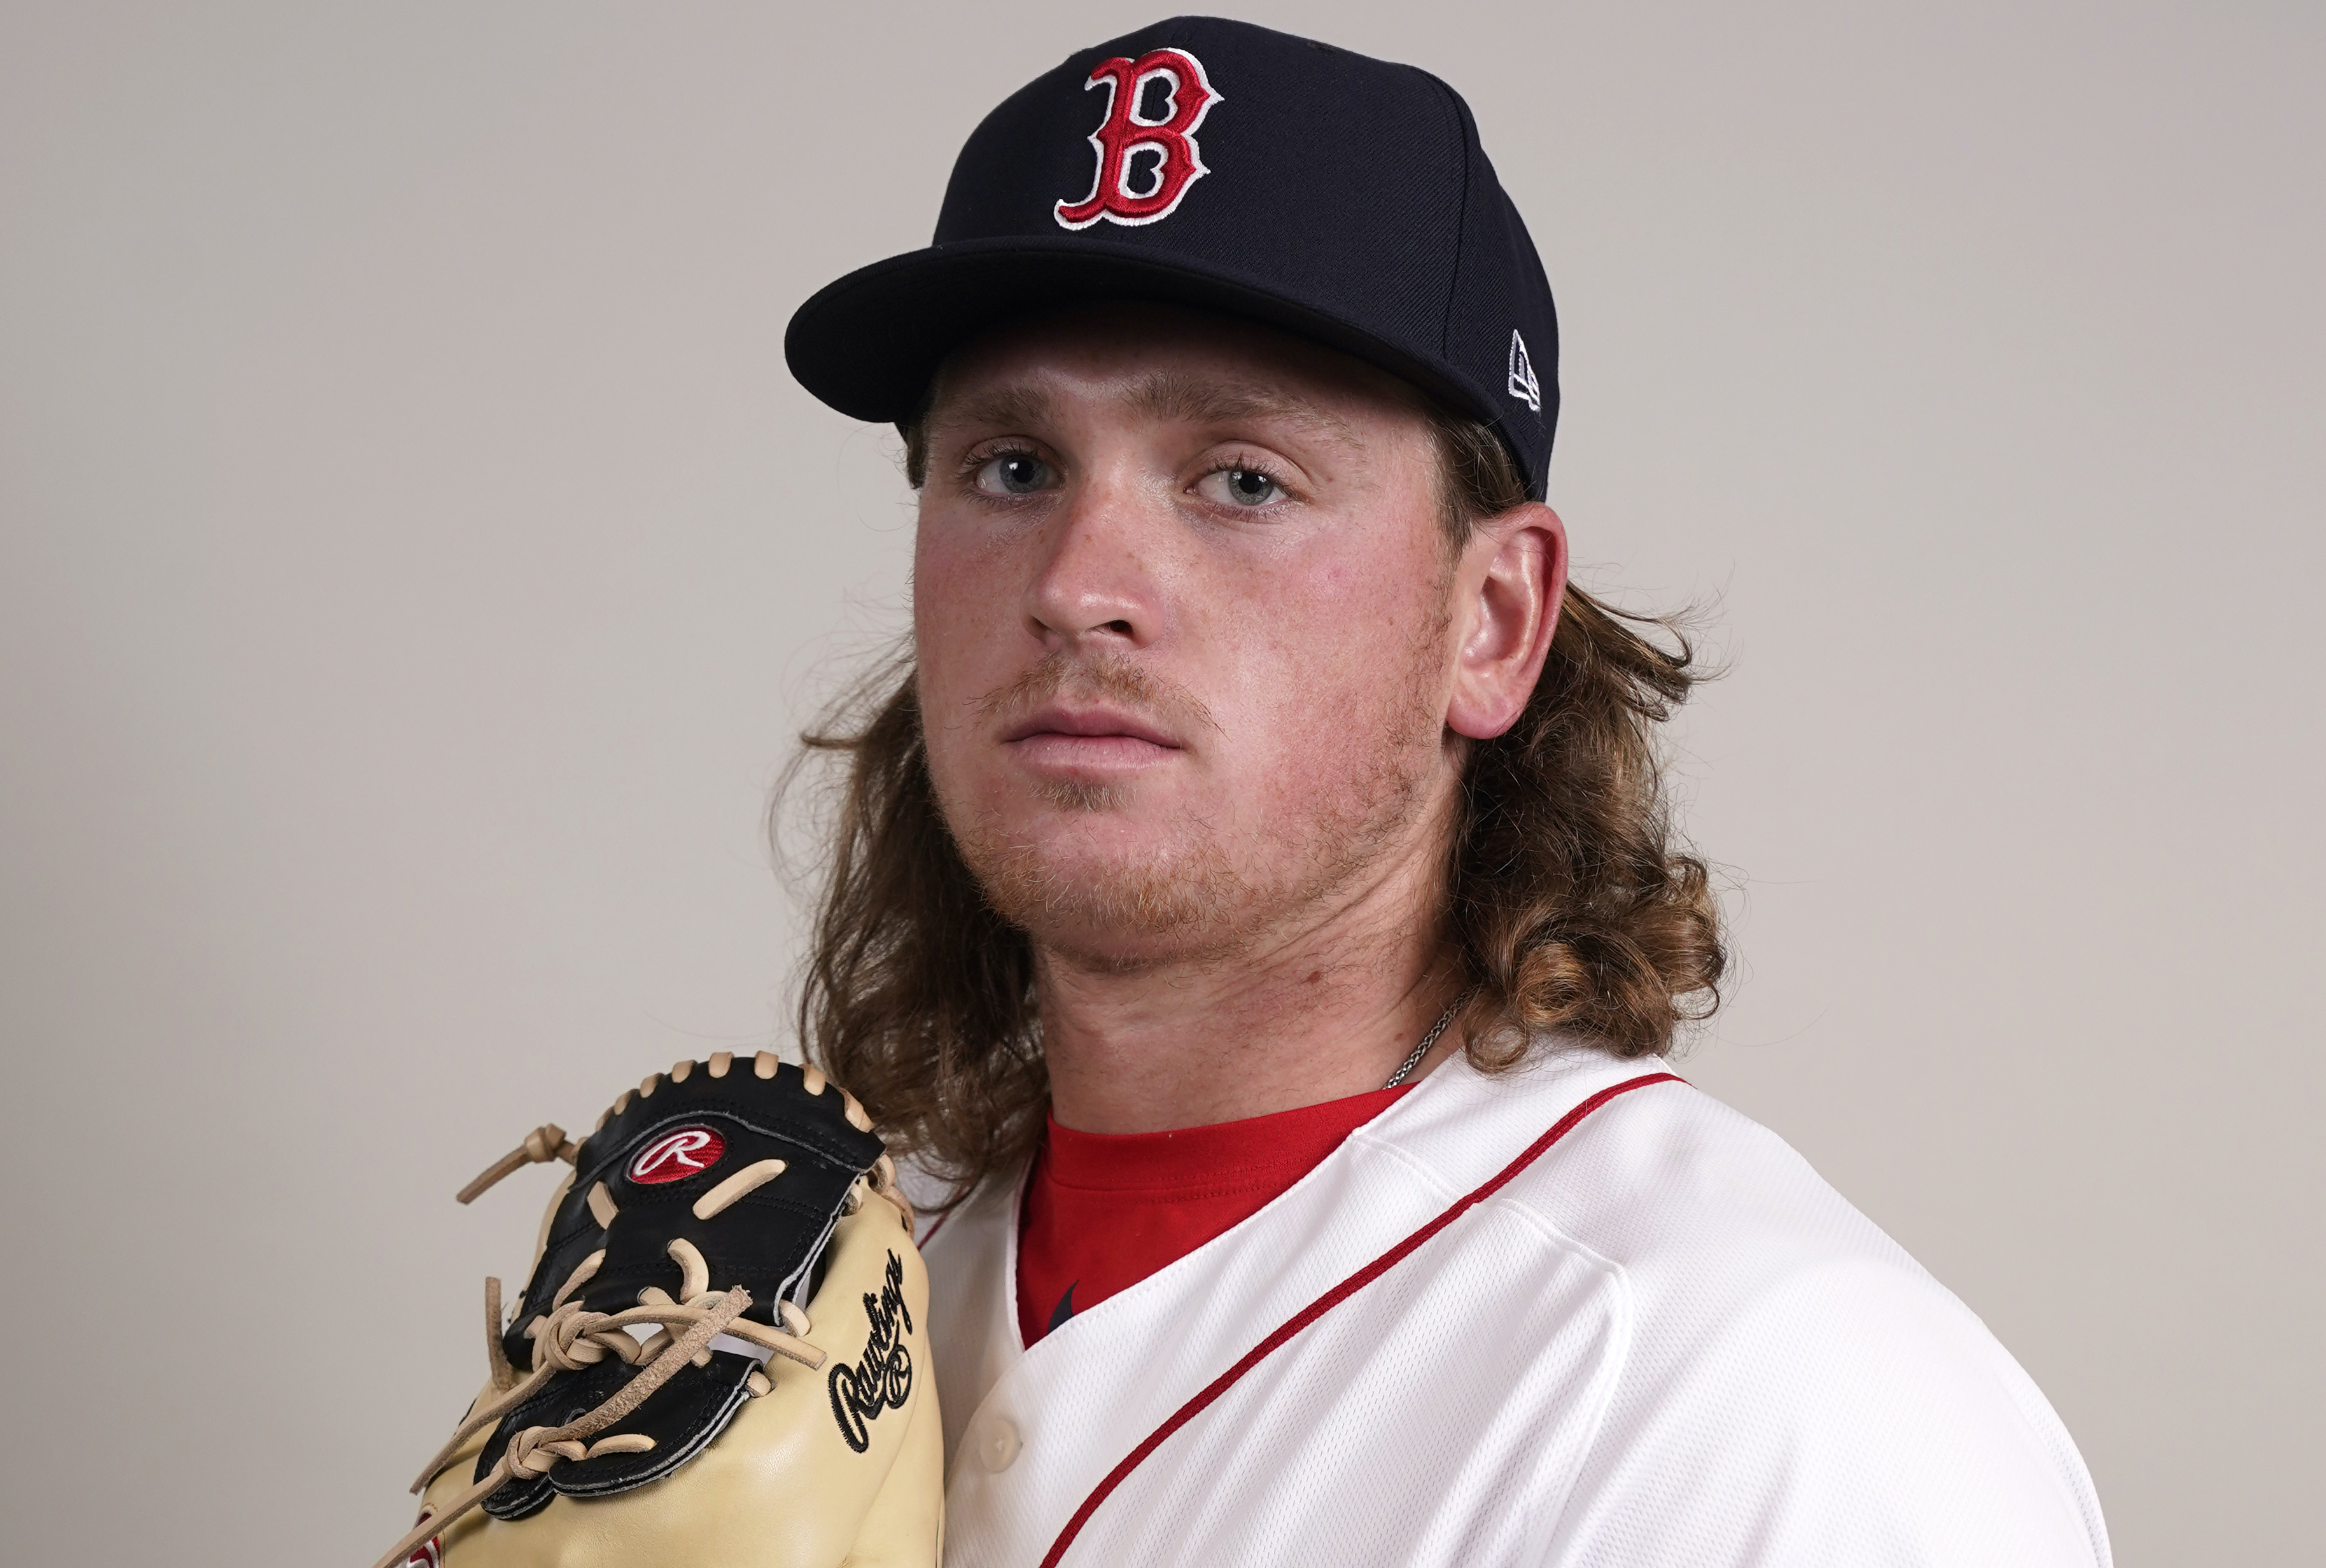 Boston Red Sox pitching prospect Jay Groome feels closer than ever